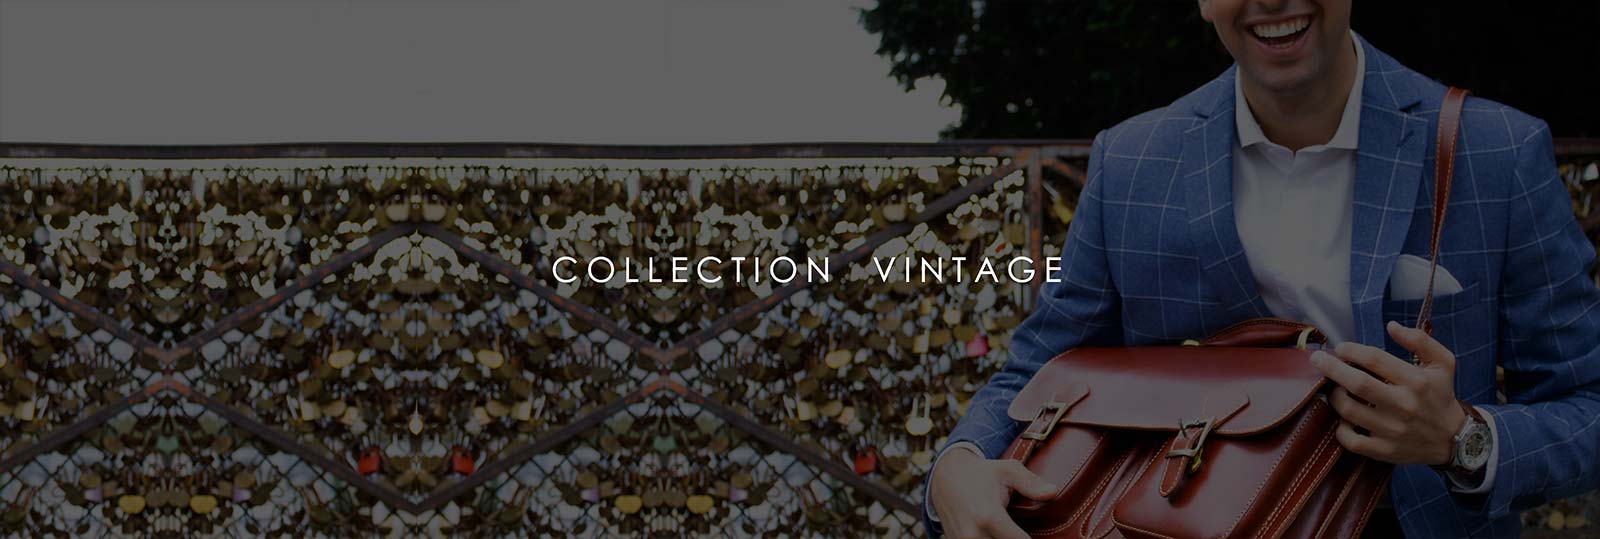 Collection vintage